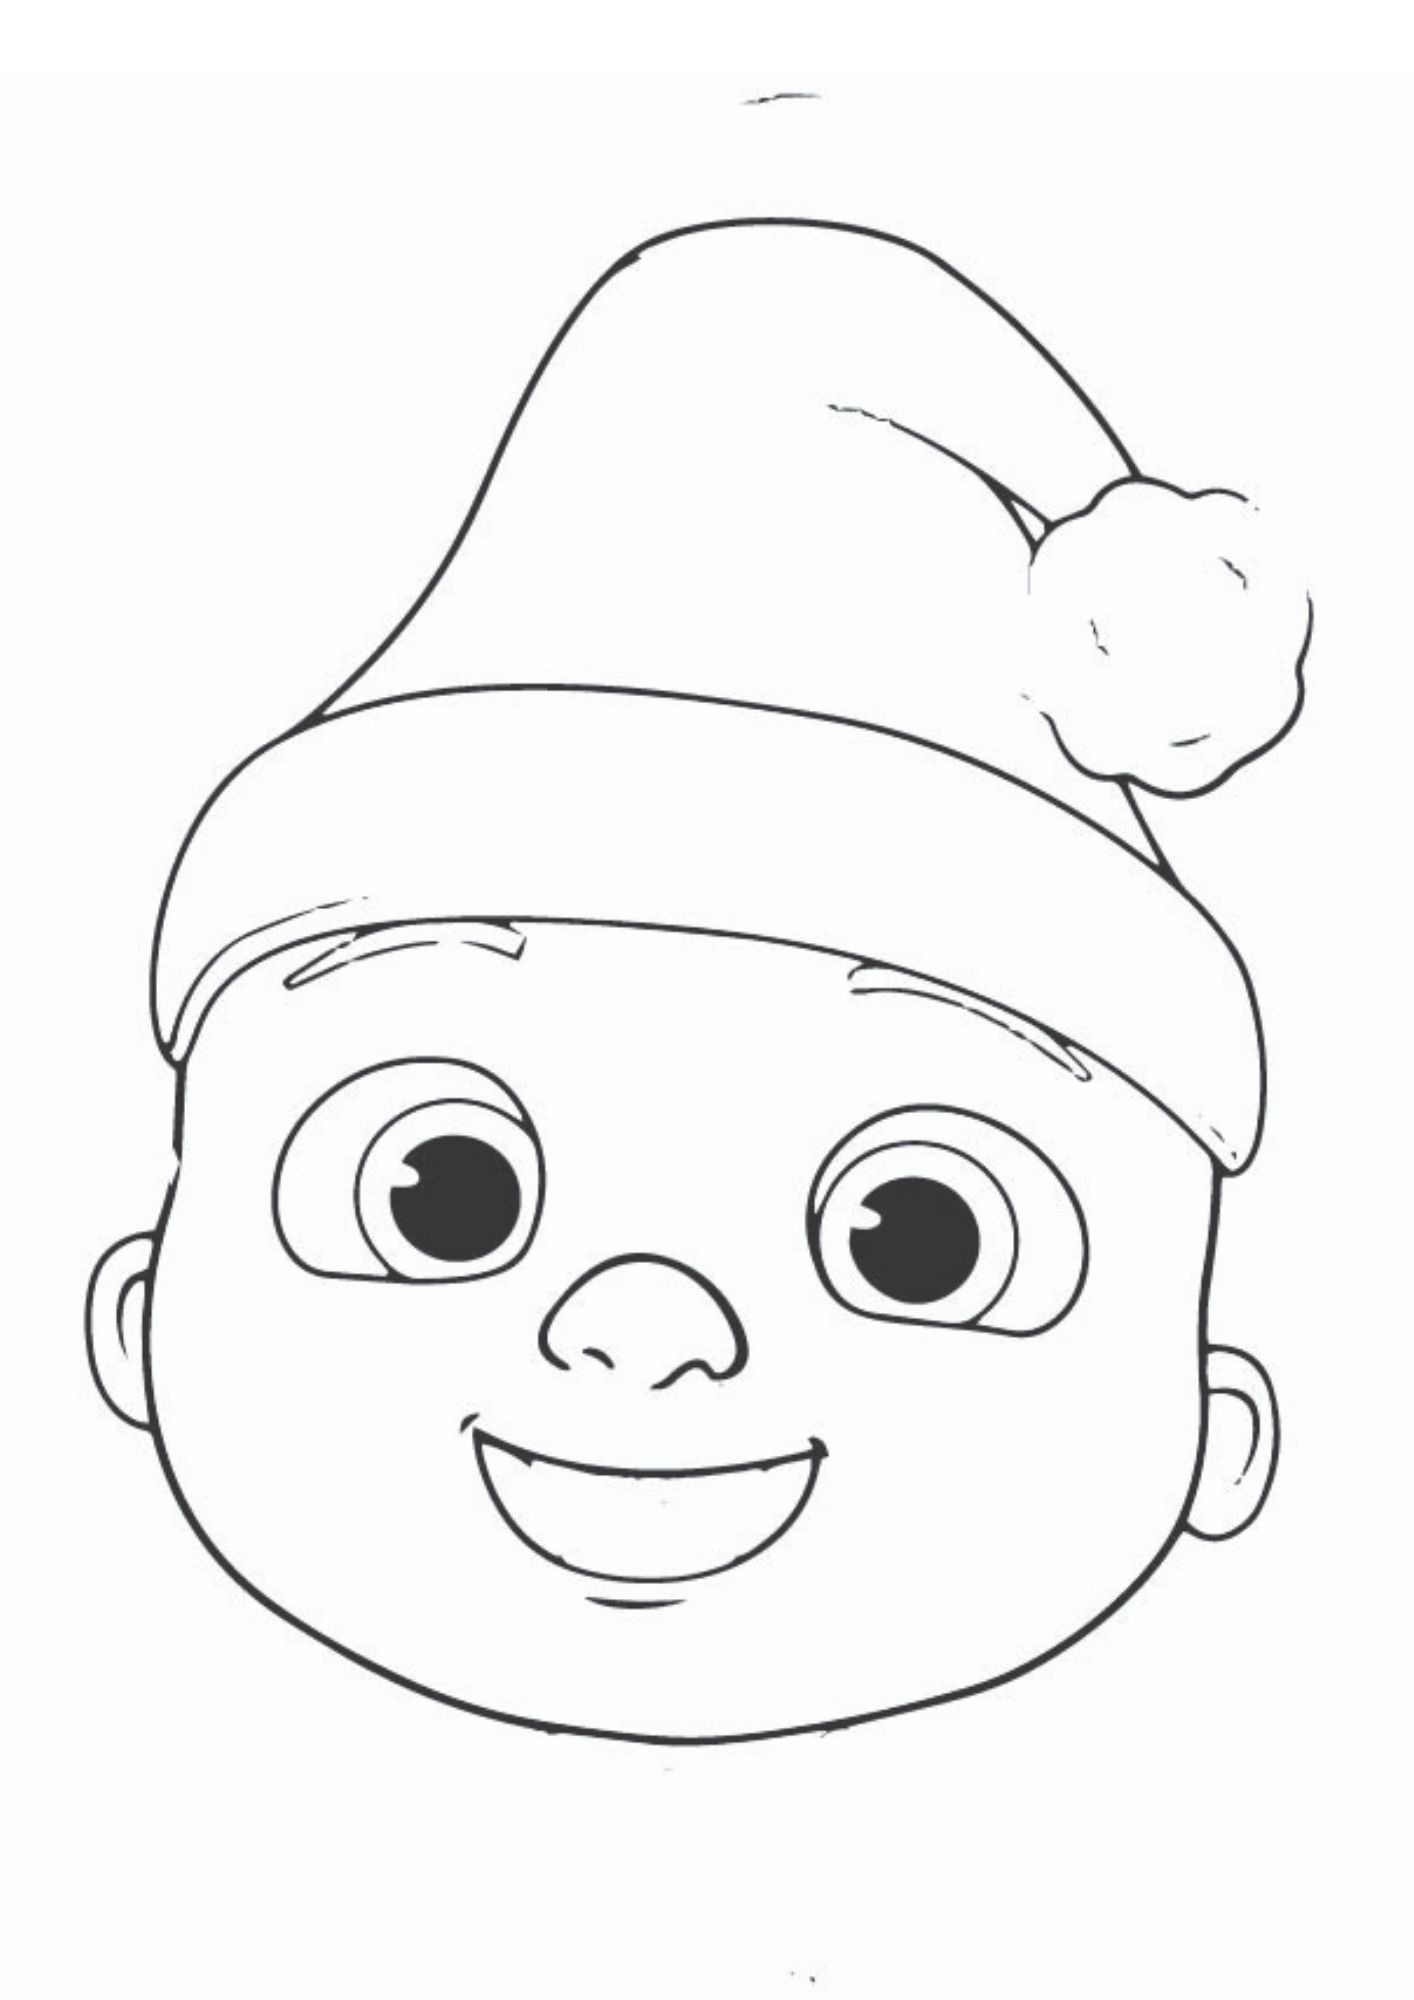 Cocomelon Coloring Pages - Coloring with Kids